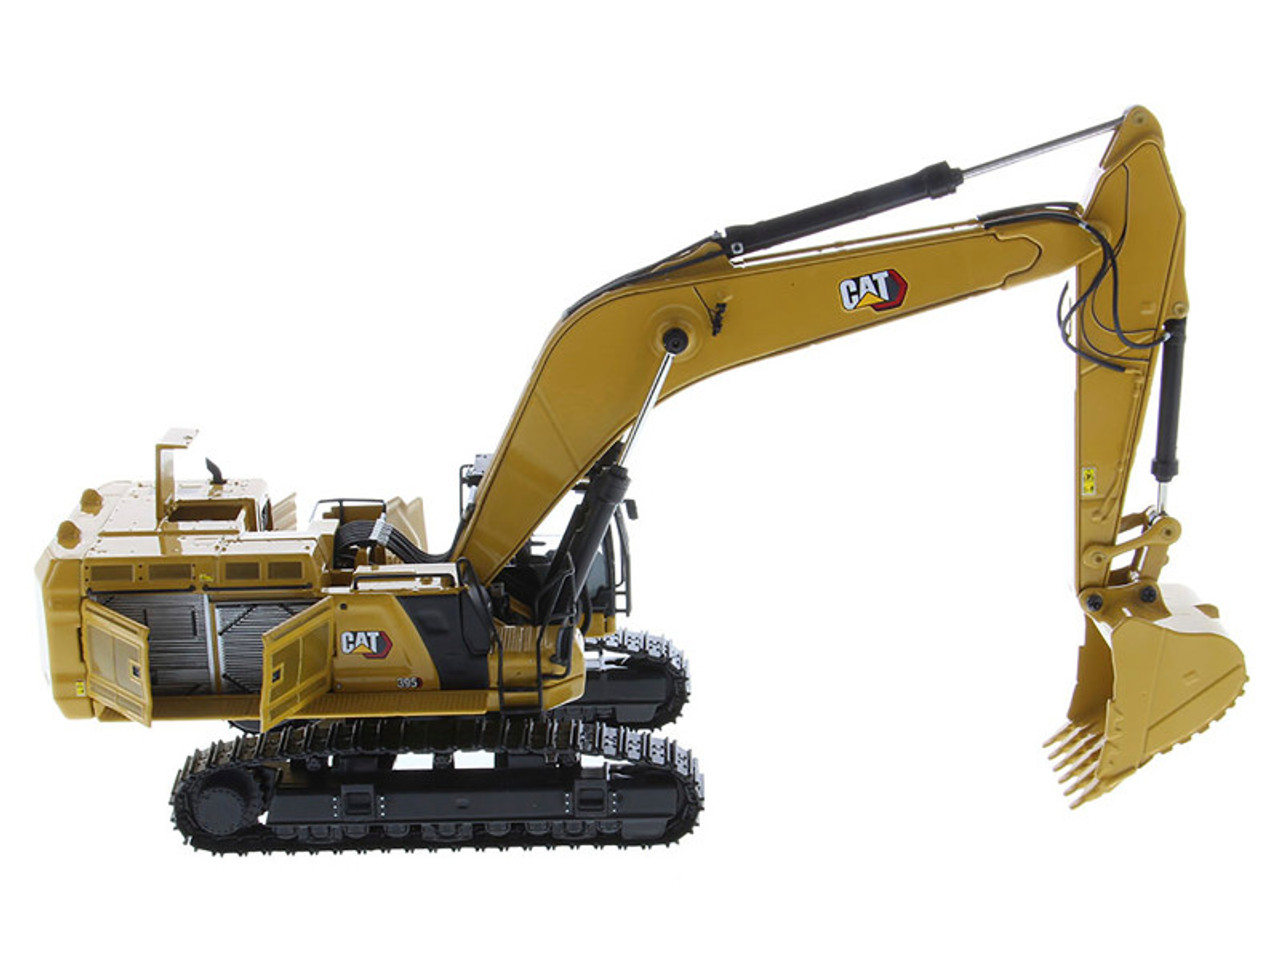 CAT Caterpillar 395 Next Generation Hydraulic Excavator (General Purpose Version) Yellow with Operator and Additional Tools "High Line" Series 1/50 Diecast Model by Diecast Masters